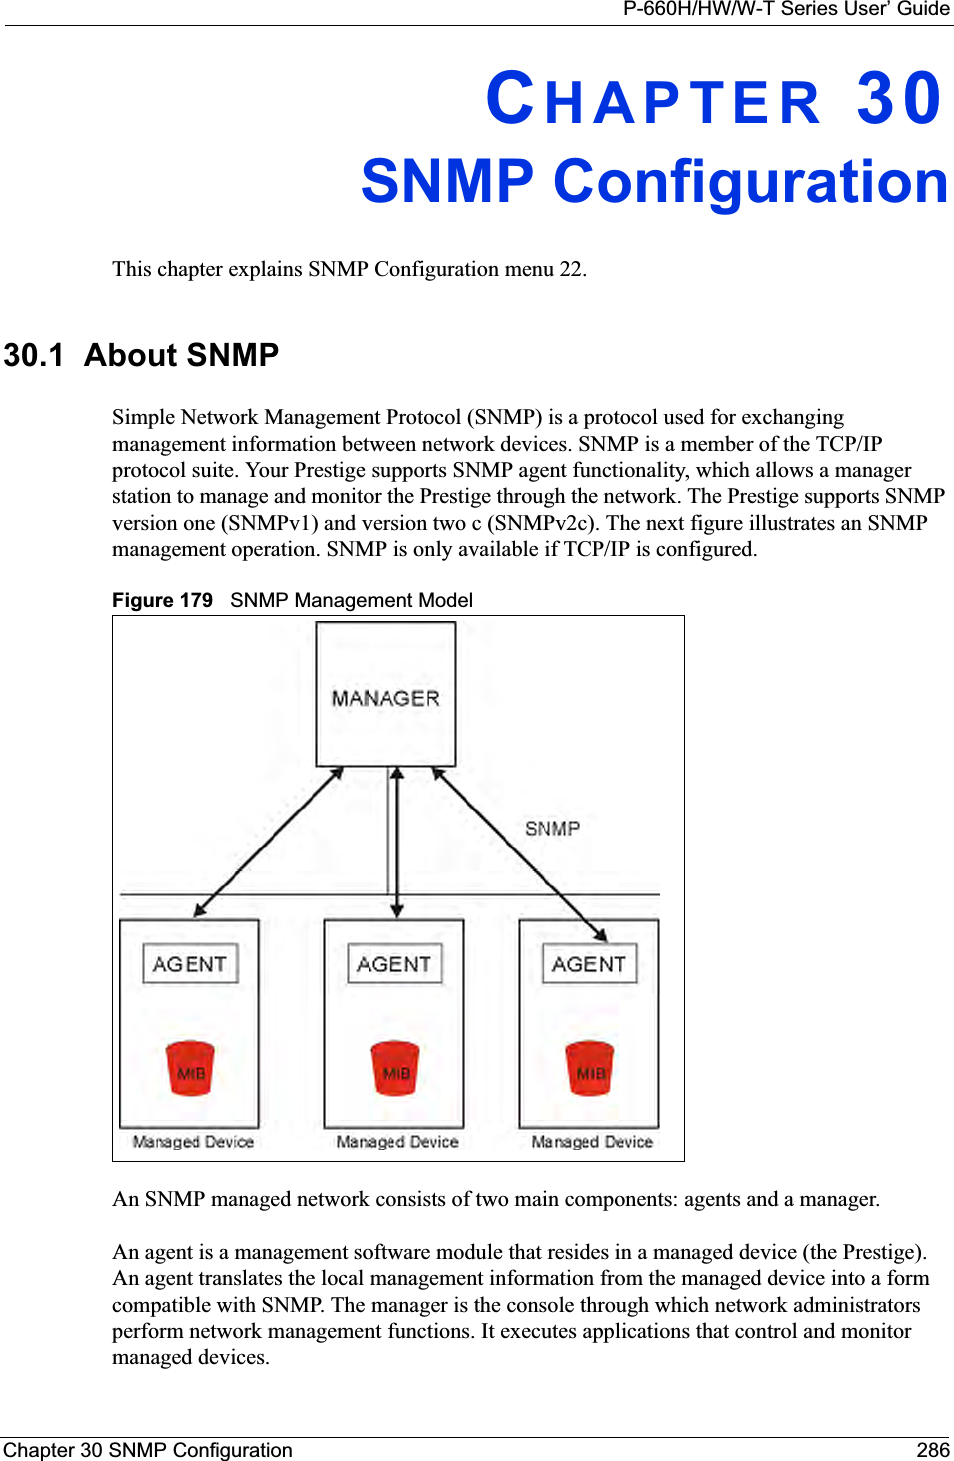 P-660H/HW/W-T Series User’ GuideChapter 30 SNMP Configuration 286CHAPTER 30SNMP ConfigurationThis chapter explains SNMP Configuration menu 22.30.1  About SNMPSimple Network Management Protocol (SNMP) is a protocol used for exchanging management information between network devices. SNMP is a member of the TCP/IP protocol suite. Your Prestige supports SNMP agent functionality, which allows a manager station to manage and monitor the Prestige through the network. The Prestige supports SNMP version one (SNMPv1) and version two c (SNMPv2c). The next figure illustrates an SNMP management operation. SNMP is only available if TCP/IP is configured.Figure 179   SNMP Management ModelAn SNMP managed network consists of two main components: agents and a manager. An agent is a management software module that resides in a managed device (the Prestige). An agent translates the local management information from the managed device into a form compatible with SNMP. The manager is the console through which network administrators perform network management functions. It executes applications that control and monitor managed devices. 